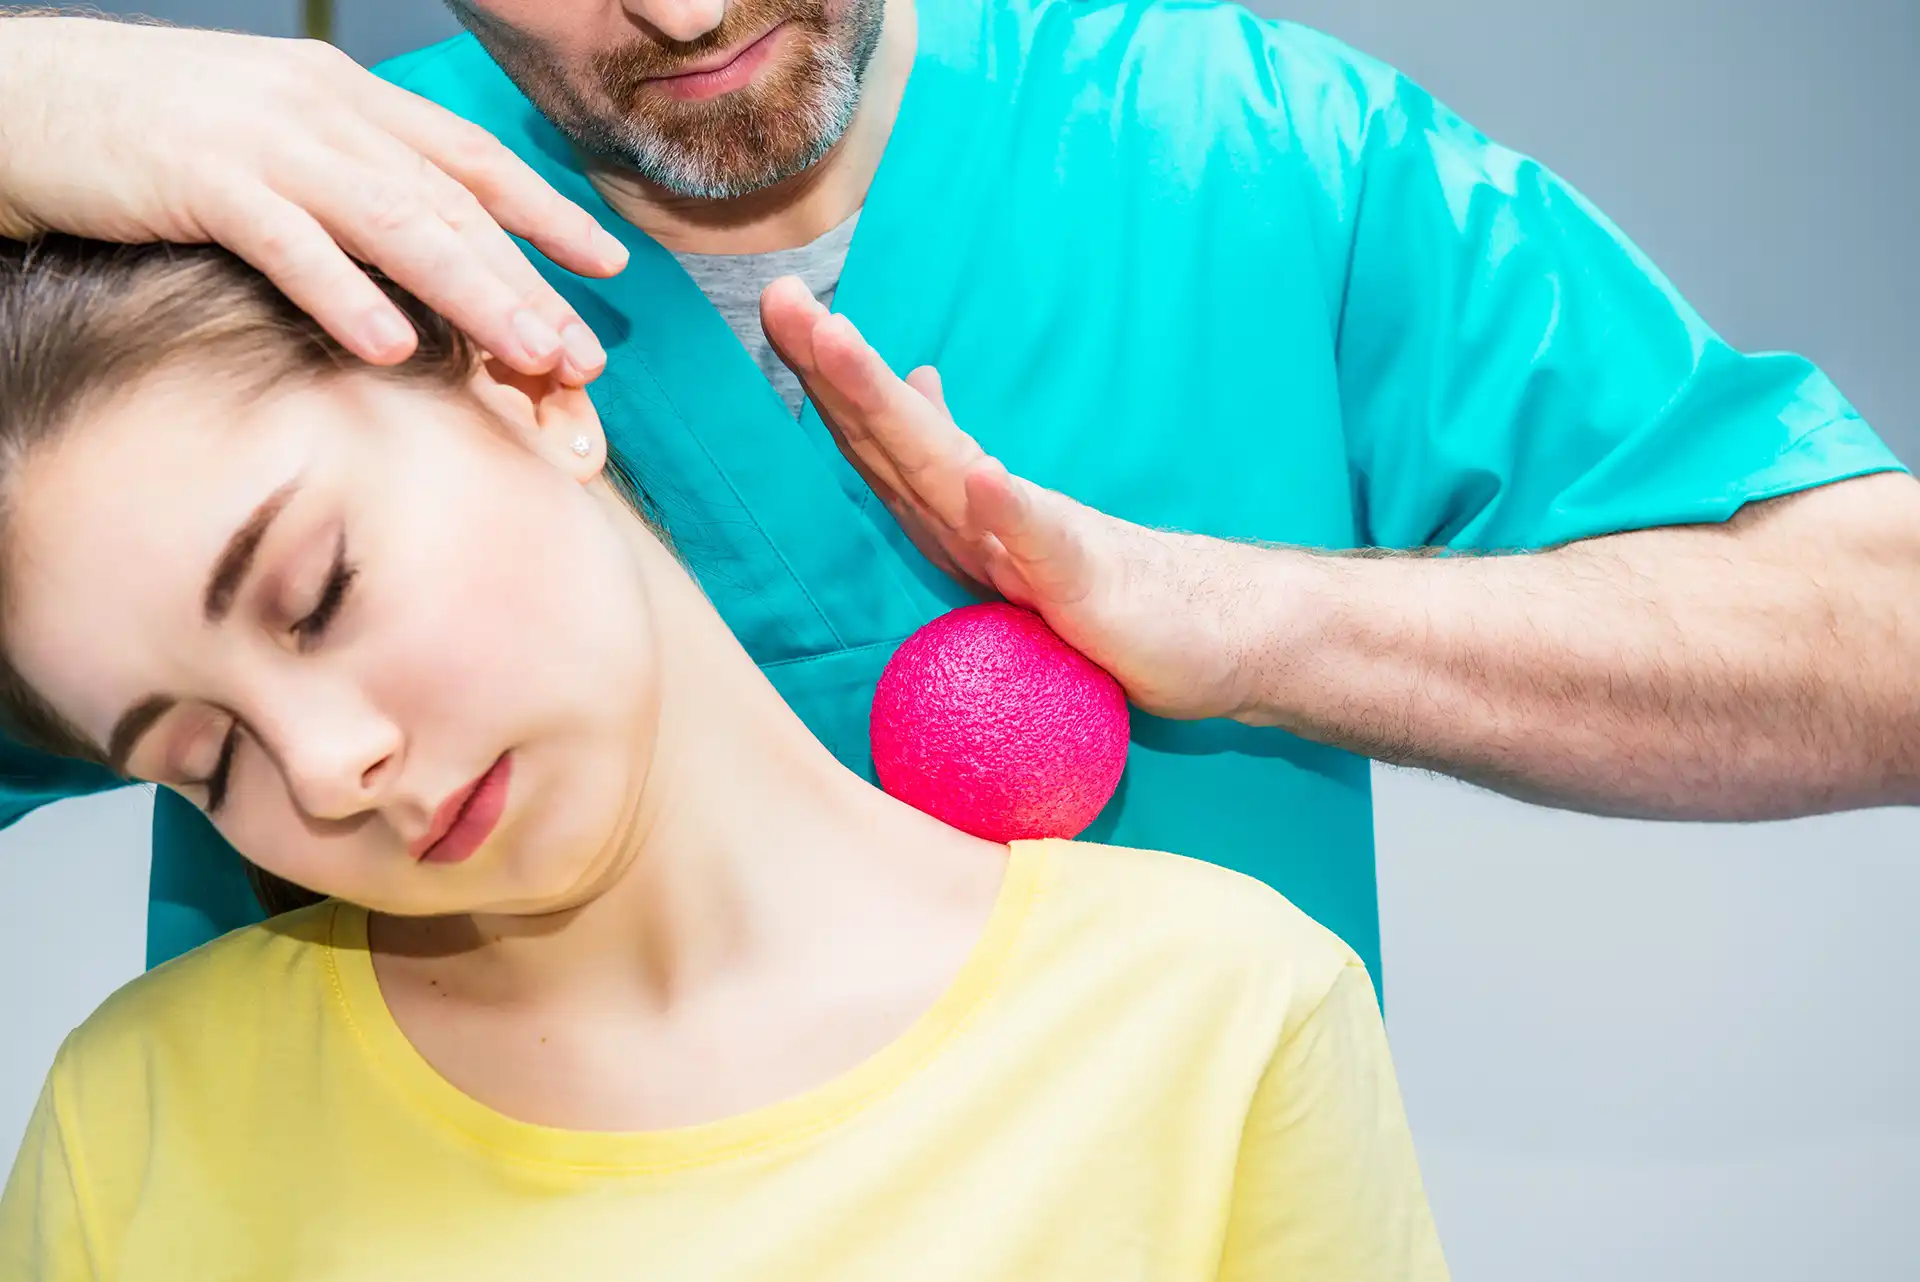 woman at the physiotherapy receiving ball massage